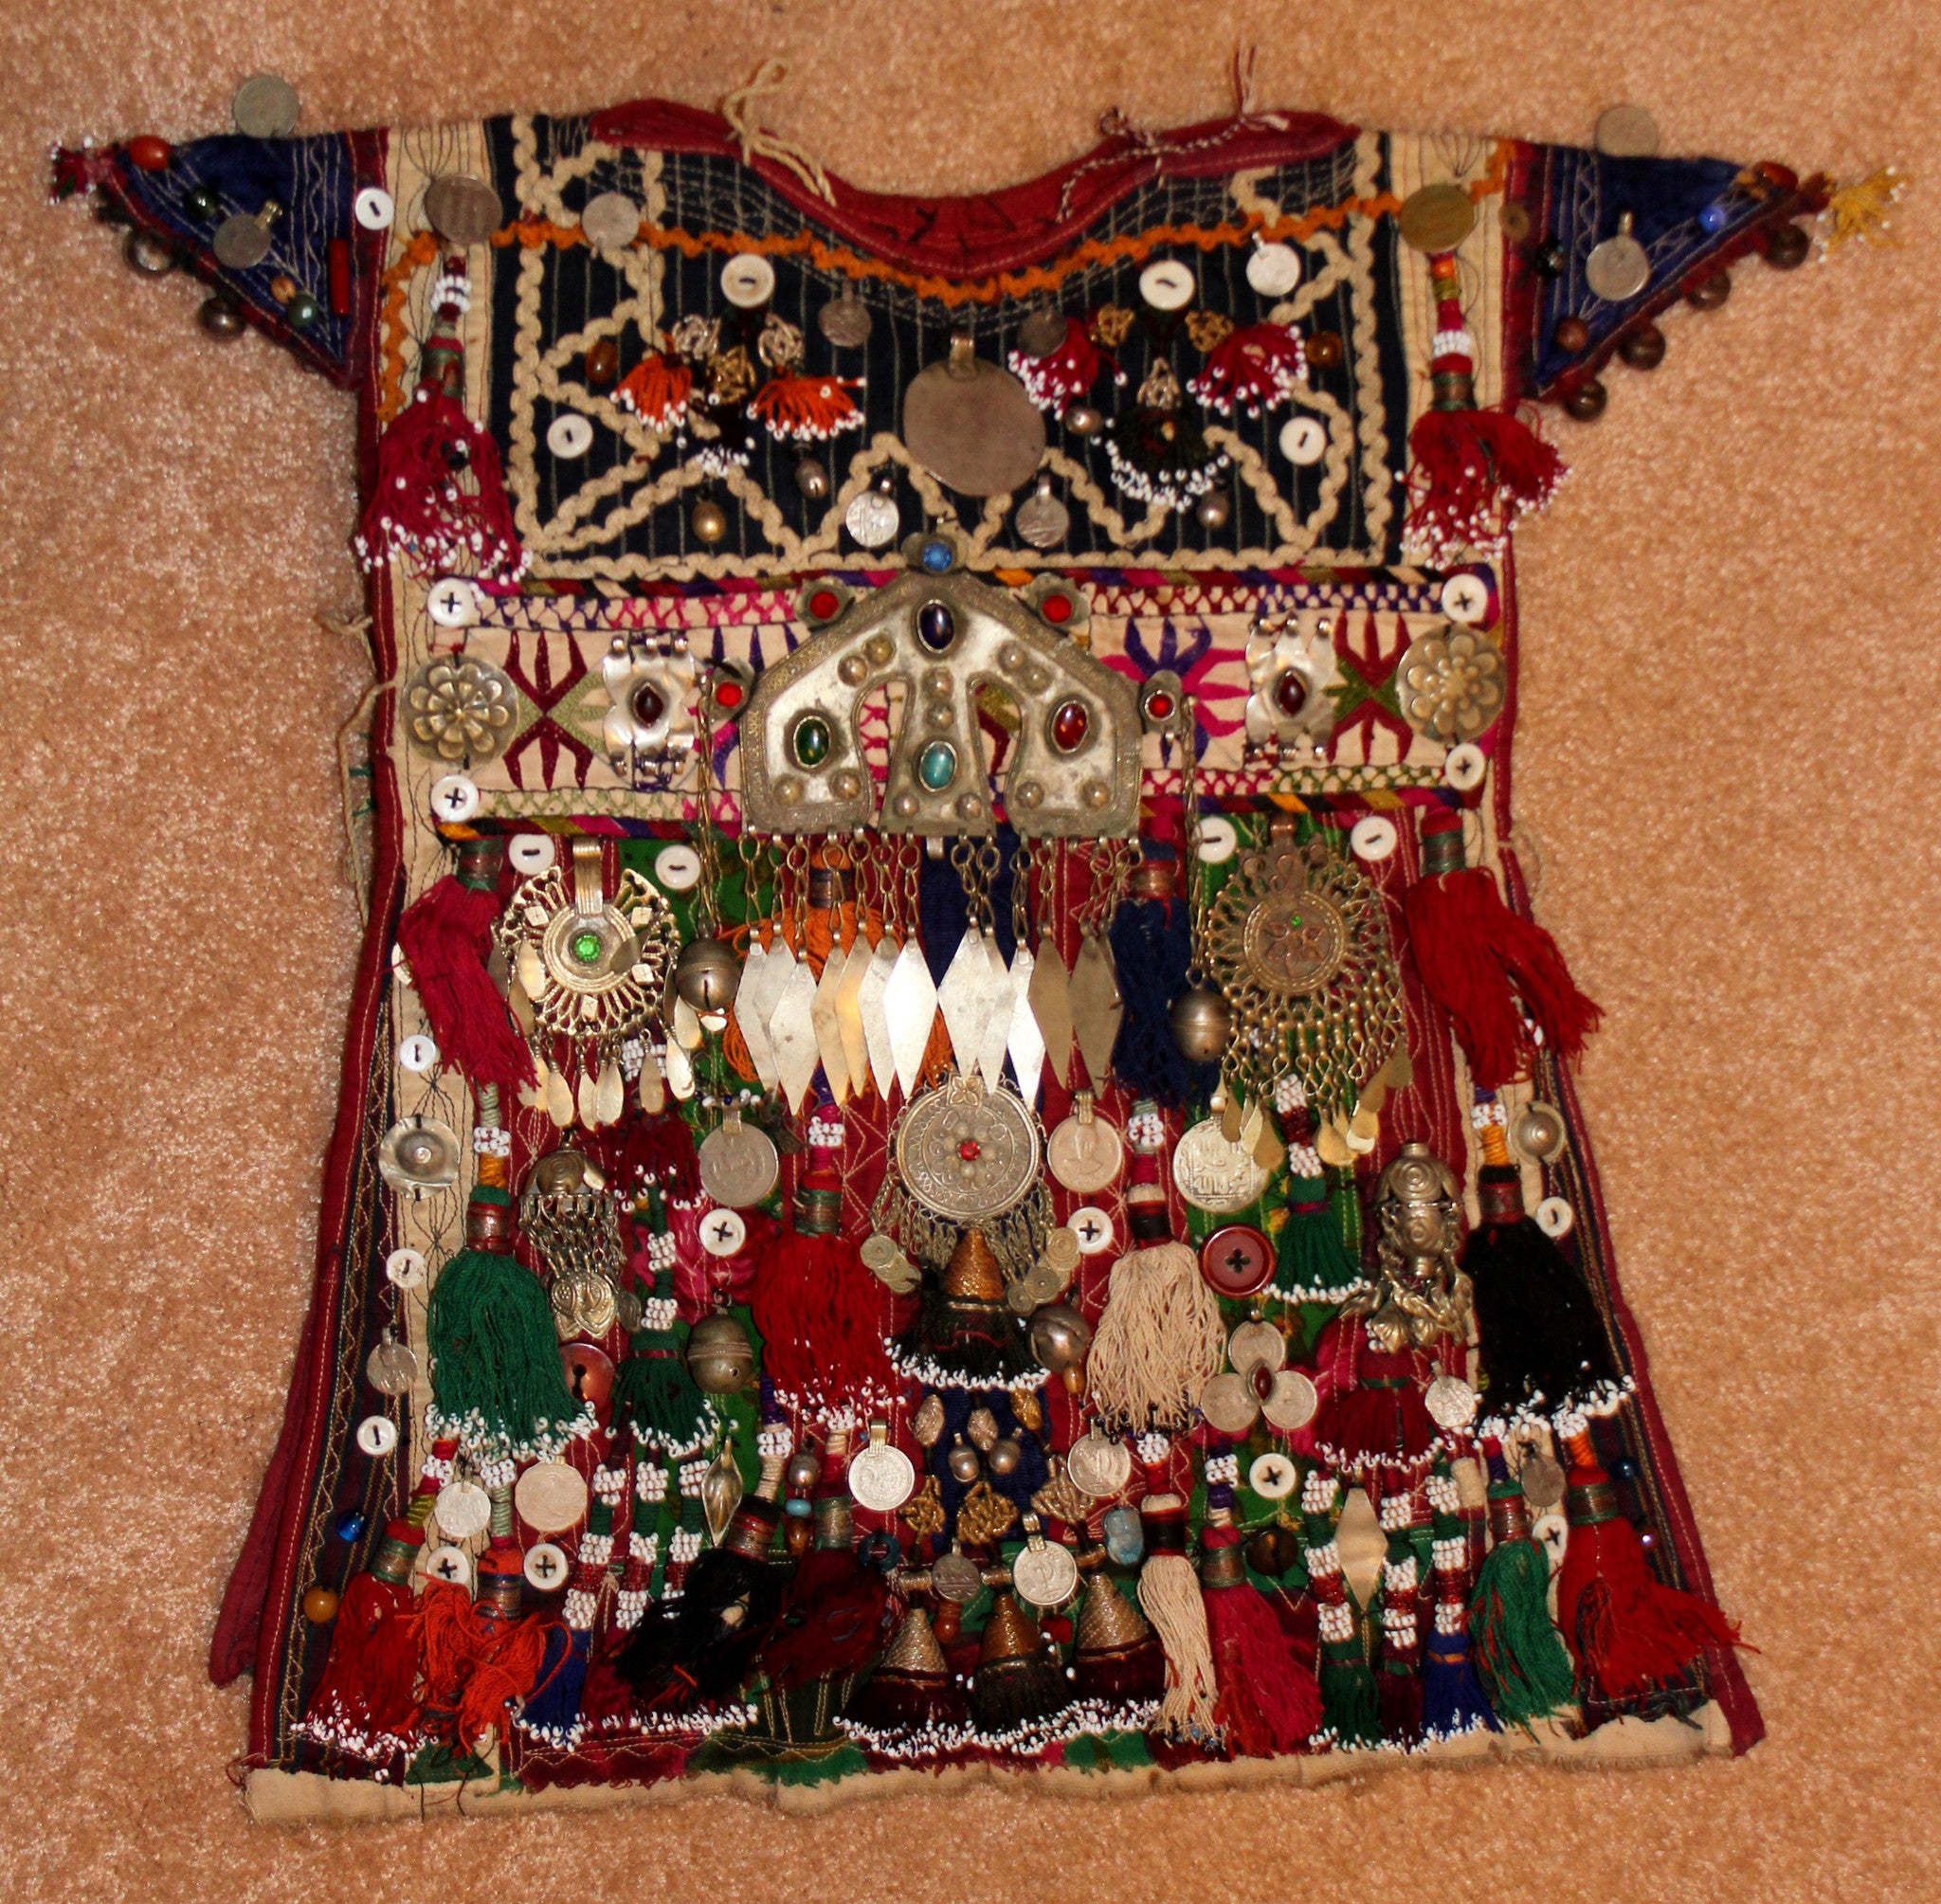 Sold at Auction: two ca 1900 vintage beaded purses